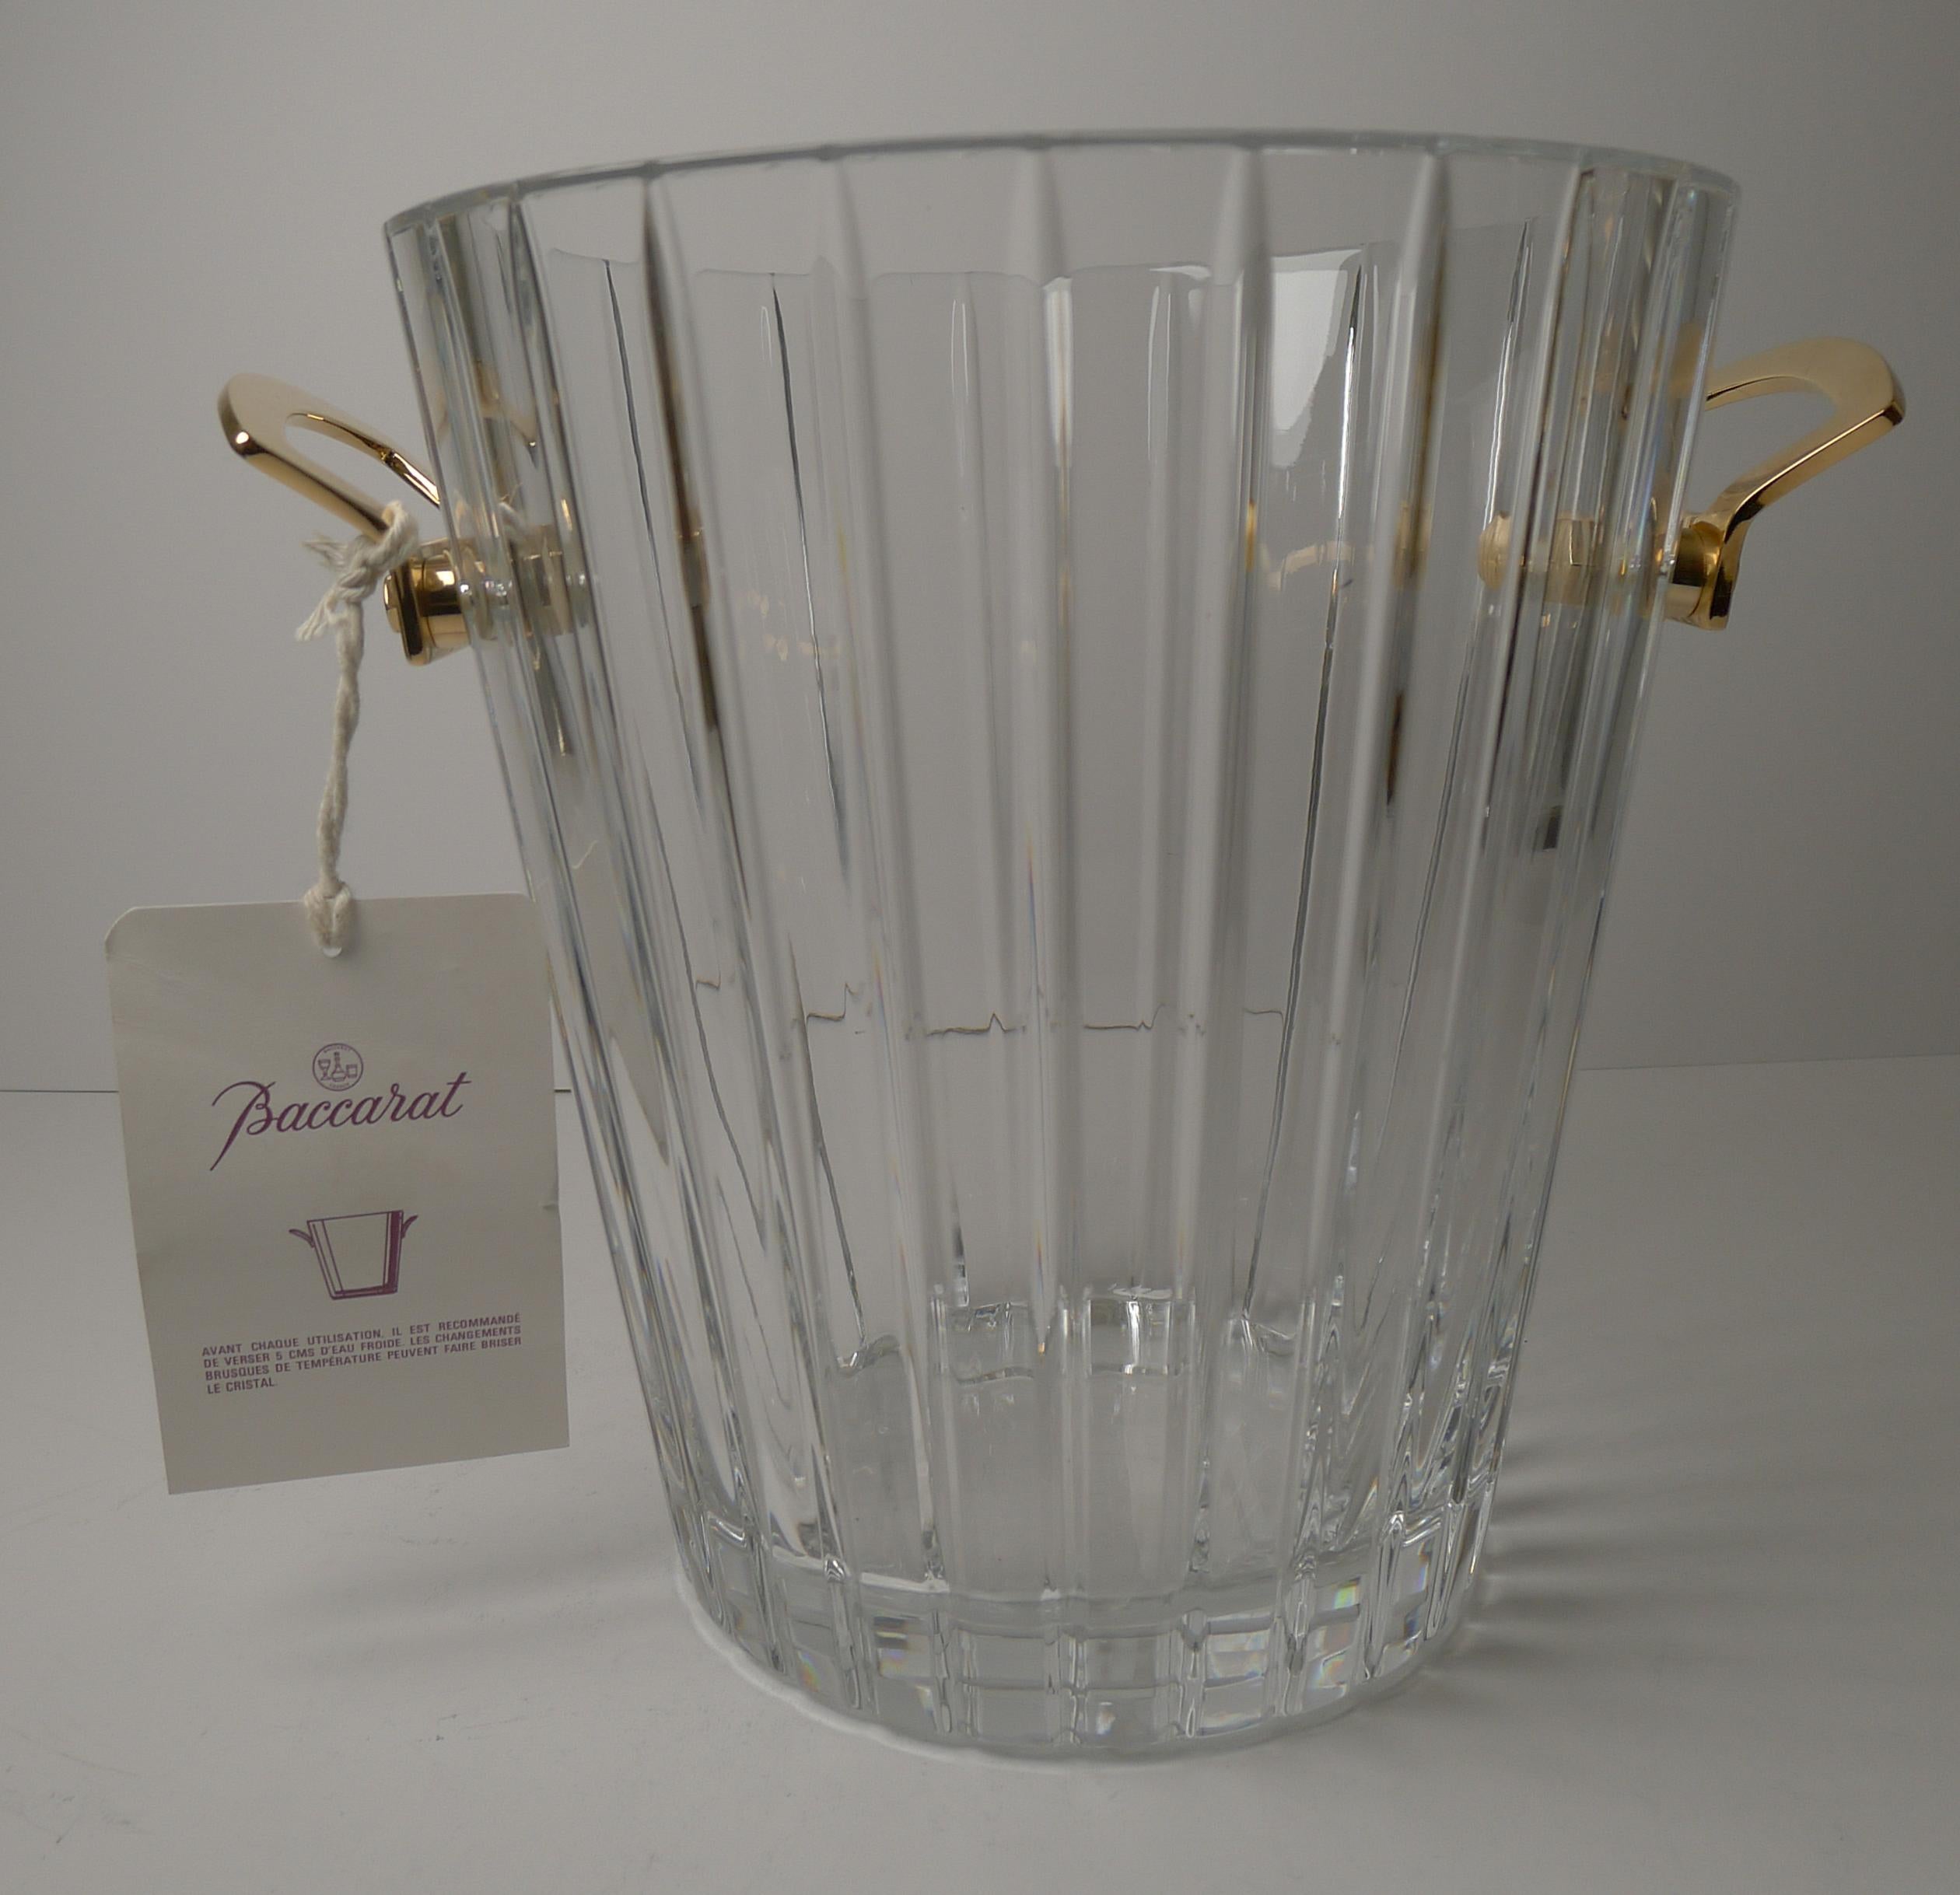 A fabulous top-notch champagne bucket or wine cooler by Baccarat, beautiful thick heavy crystal with a simple linear cut decoration.

Each of the handles is made from gilded bronze and stamped with the Baccarat mark; the underside of the crystal